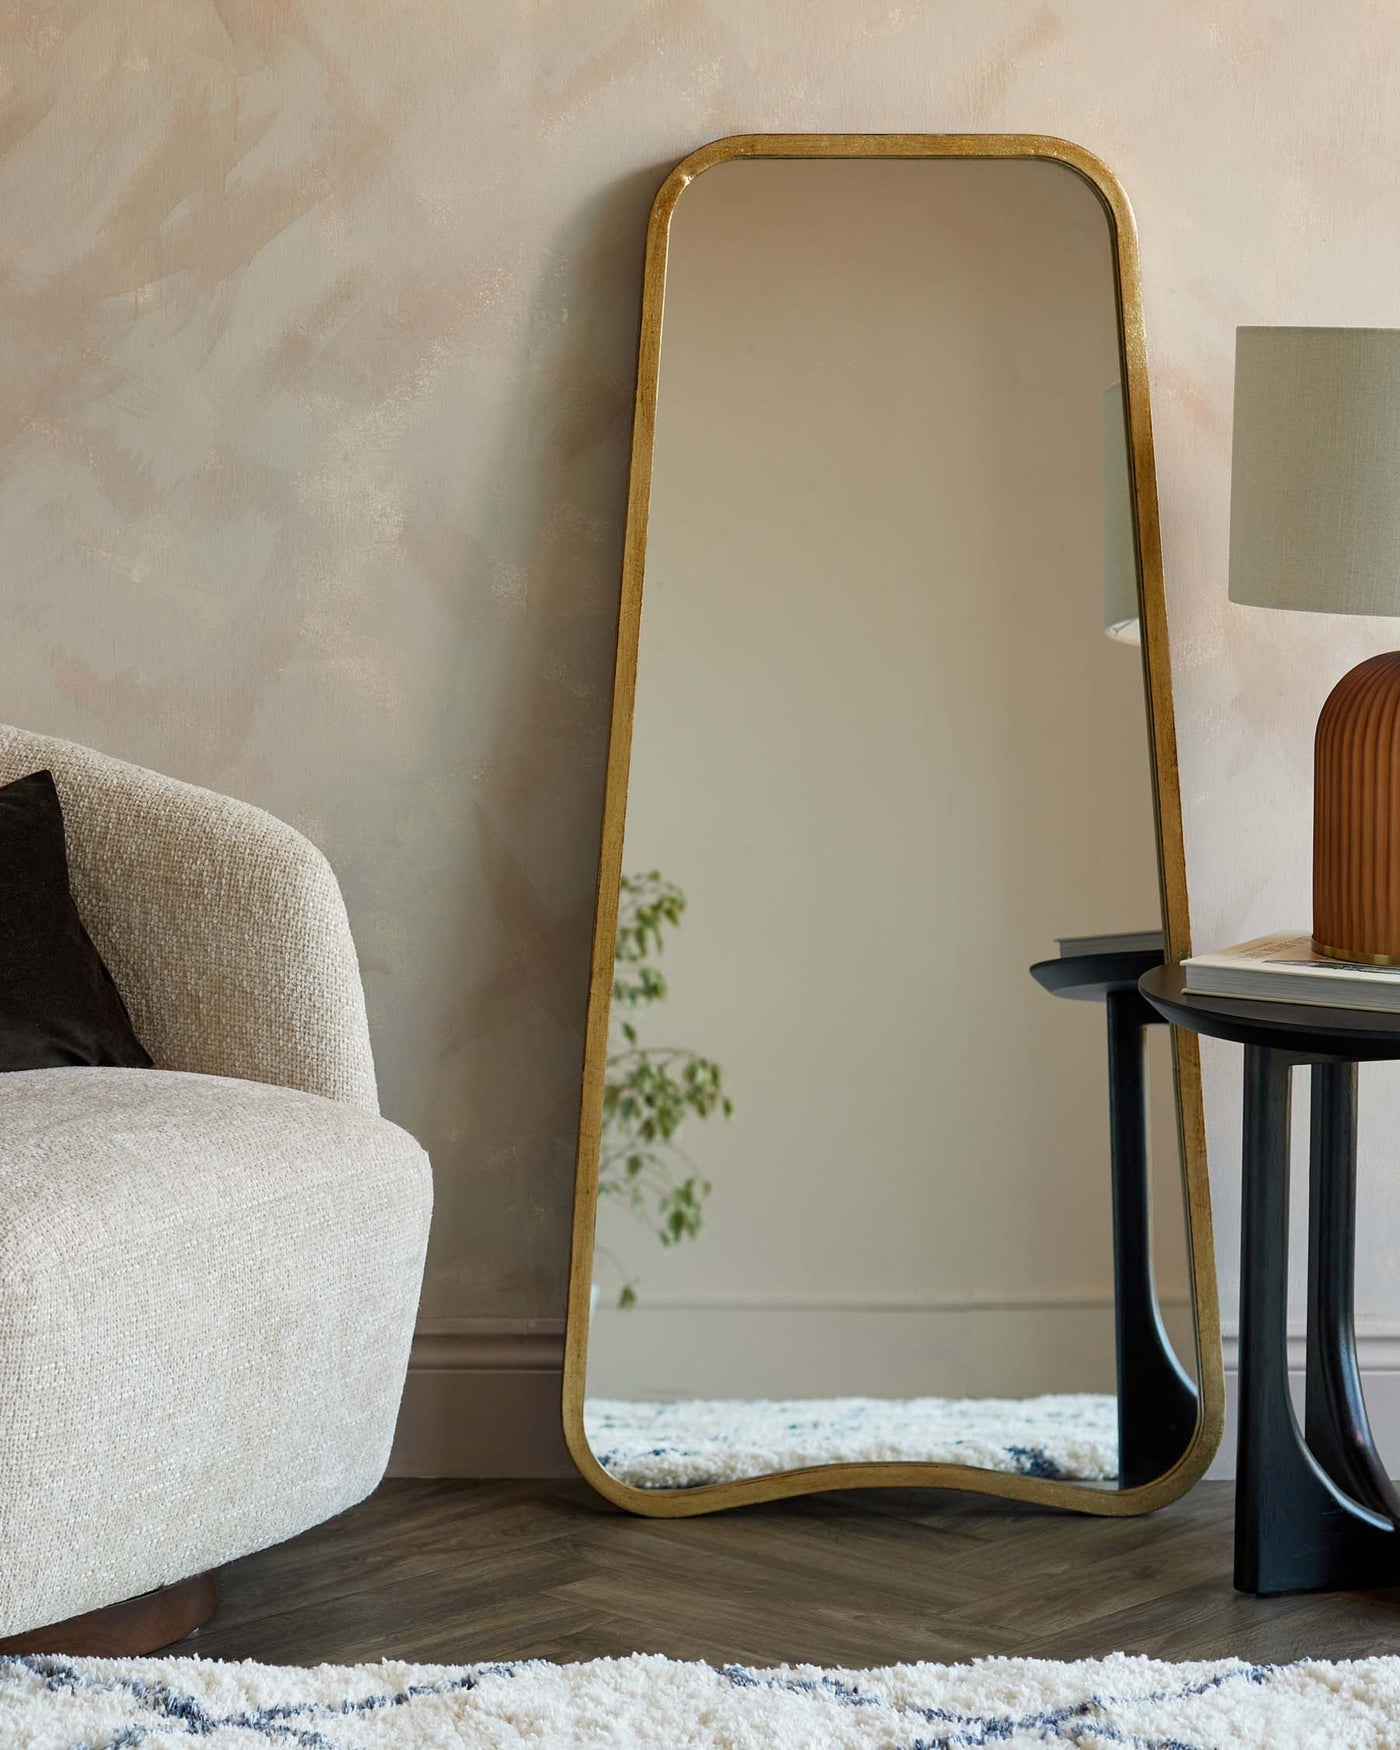 Full-length rectangular floor mirror with a curved top and a thin gold frame, a cream-textured fabric armchair with a dark rounded wooden leg visible, and a round black side table with a cylindrical base and a beige lamp with a white shade. The items are situated on a textured blue and white area rug with a herringbone wood floor visible.